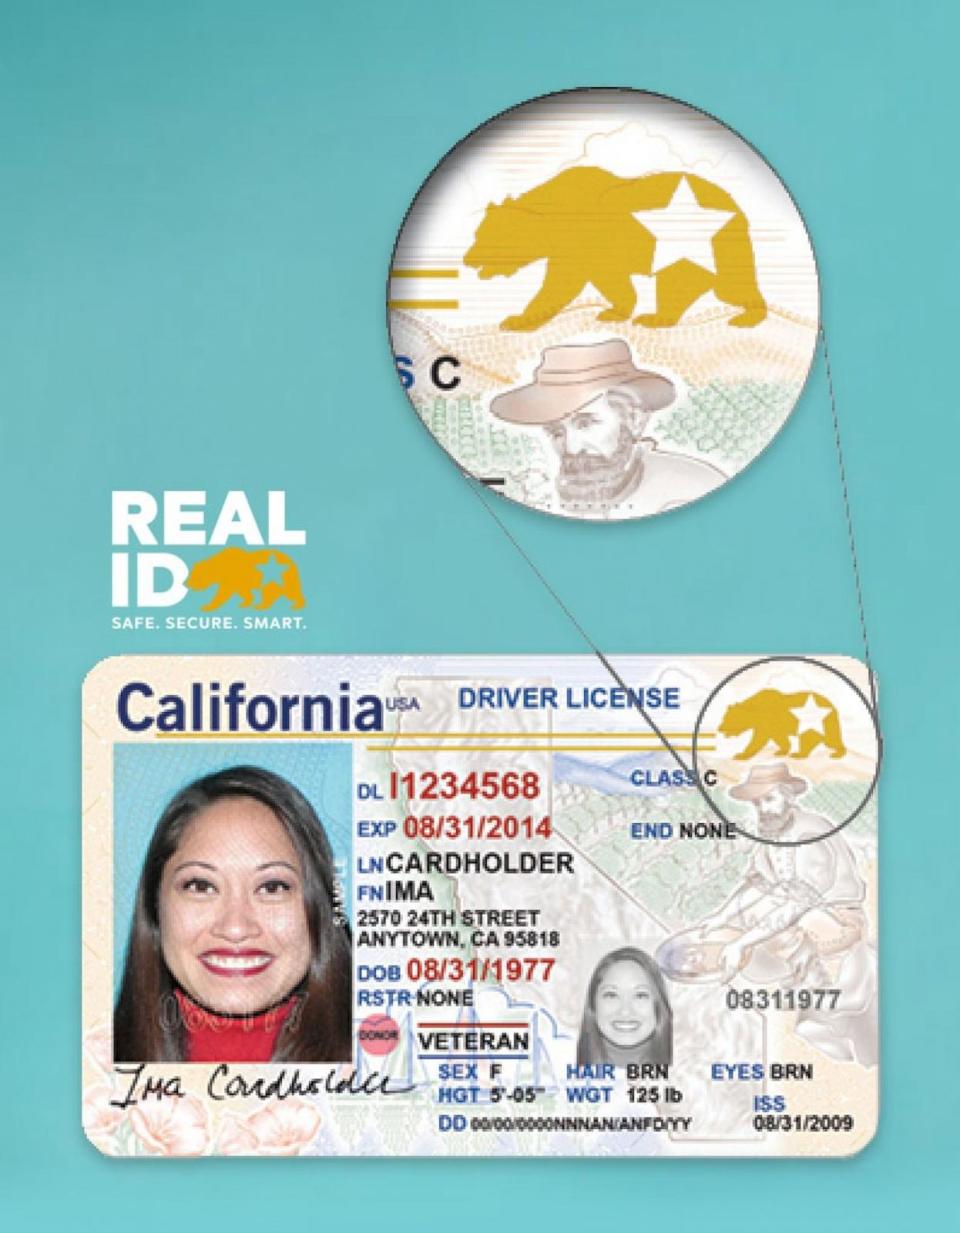 PHOTO: An example of a REAL ID from California issued by the DMV. (Dept. of Motor Vehicles)